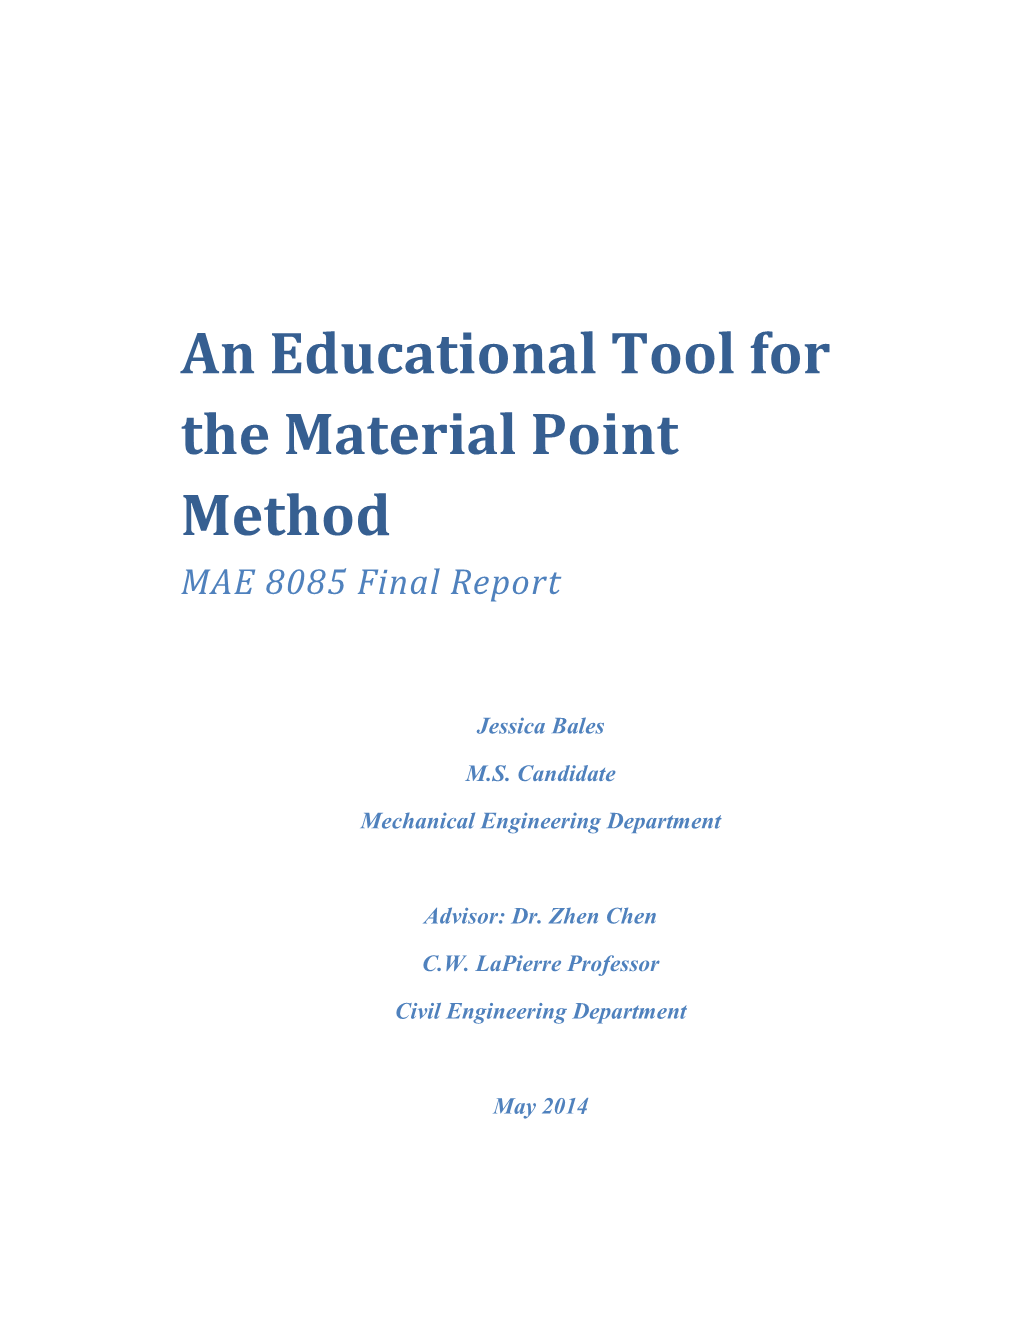 An Educational Tool for the Material Point Method MAE 8085 Final Report